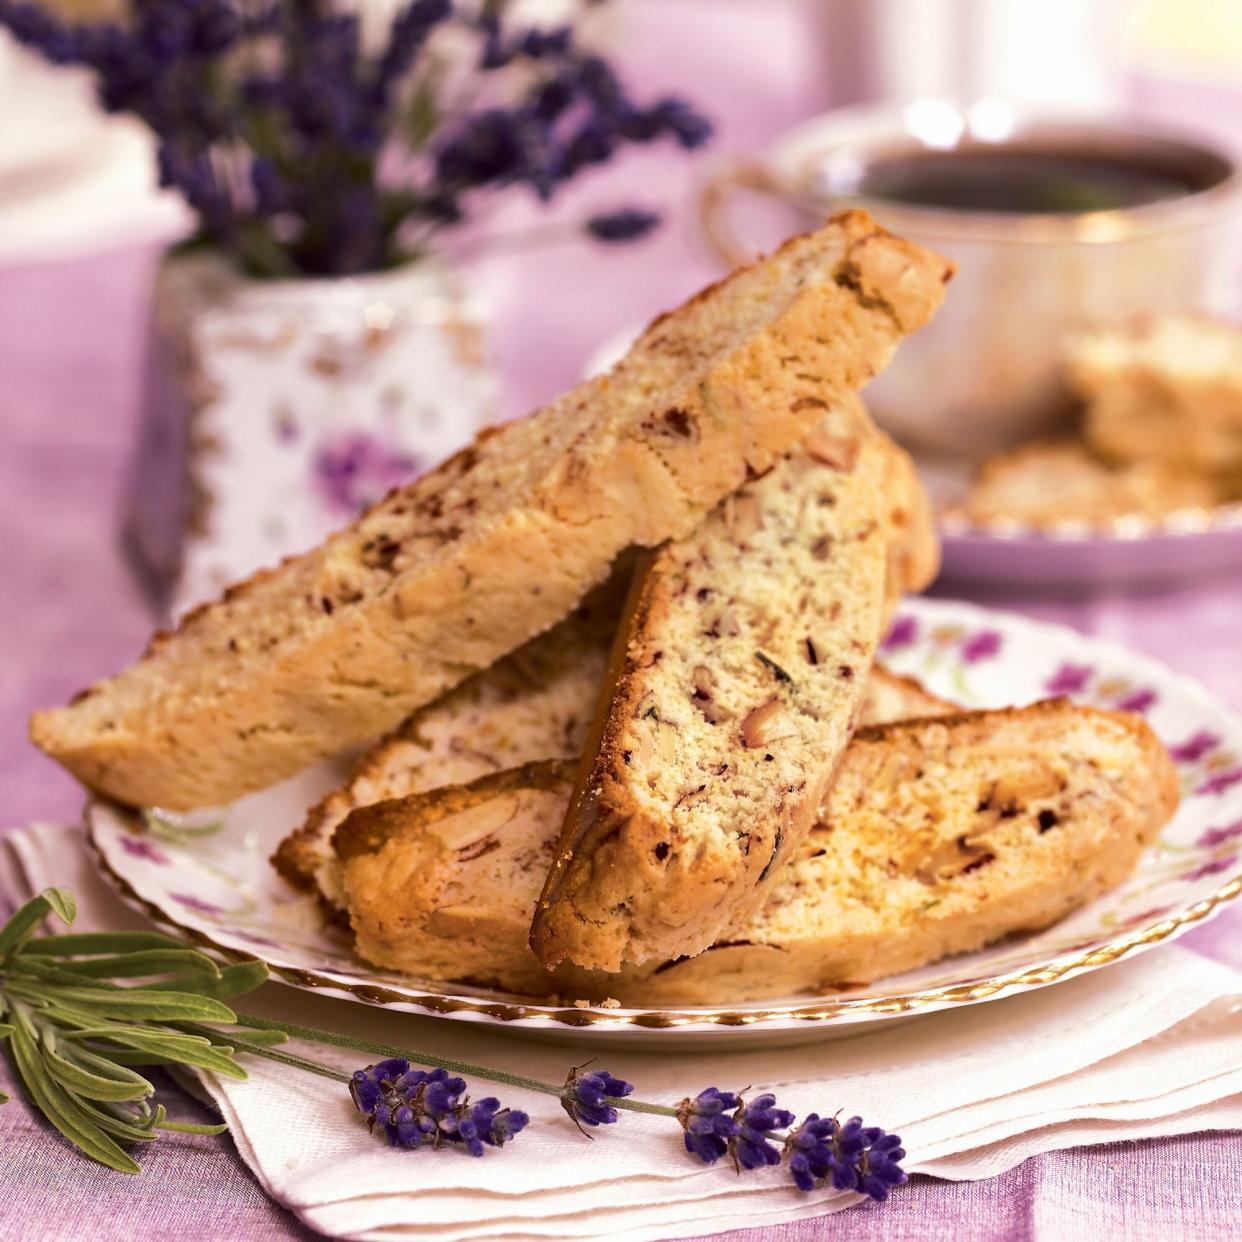 Best Cookies Recipes: Biscotti With Lavender and Orange Recipes